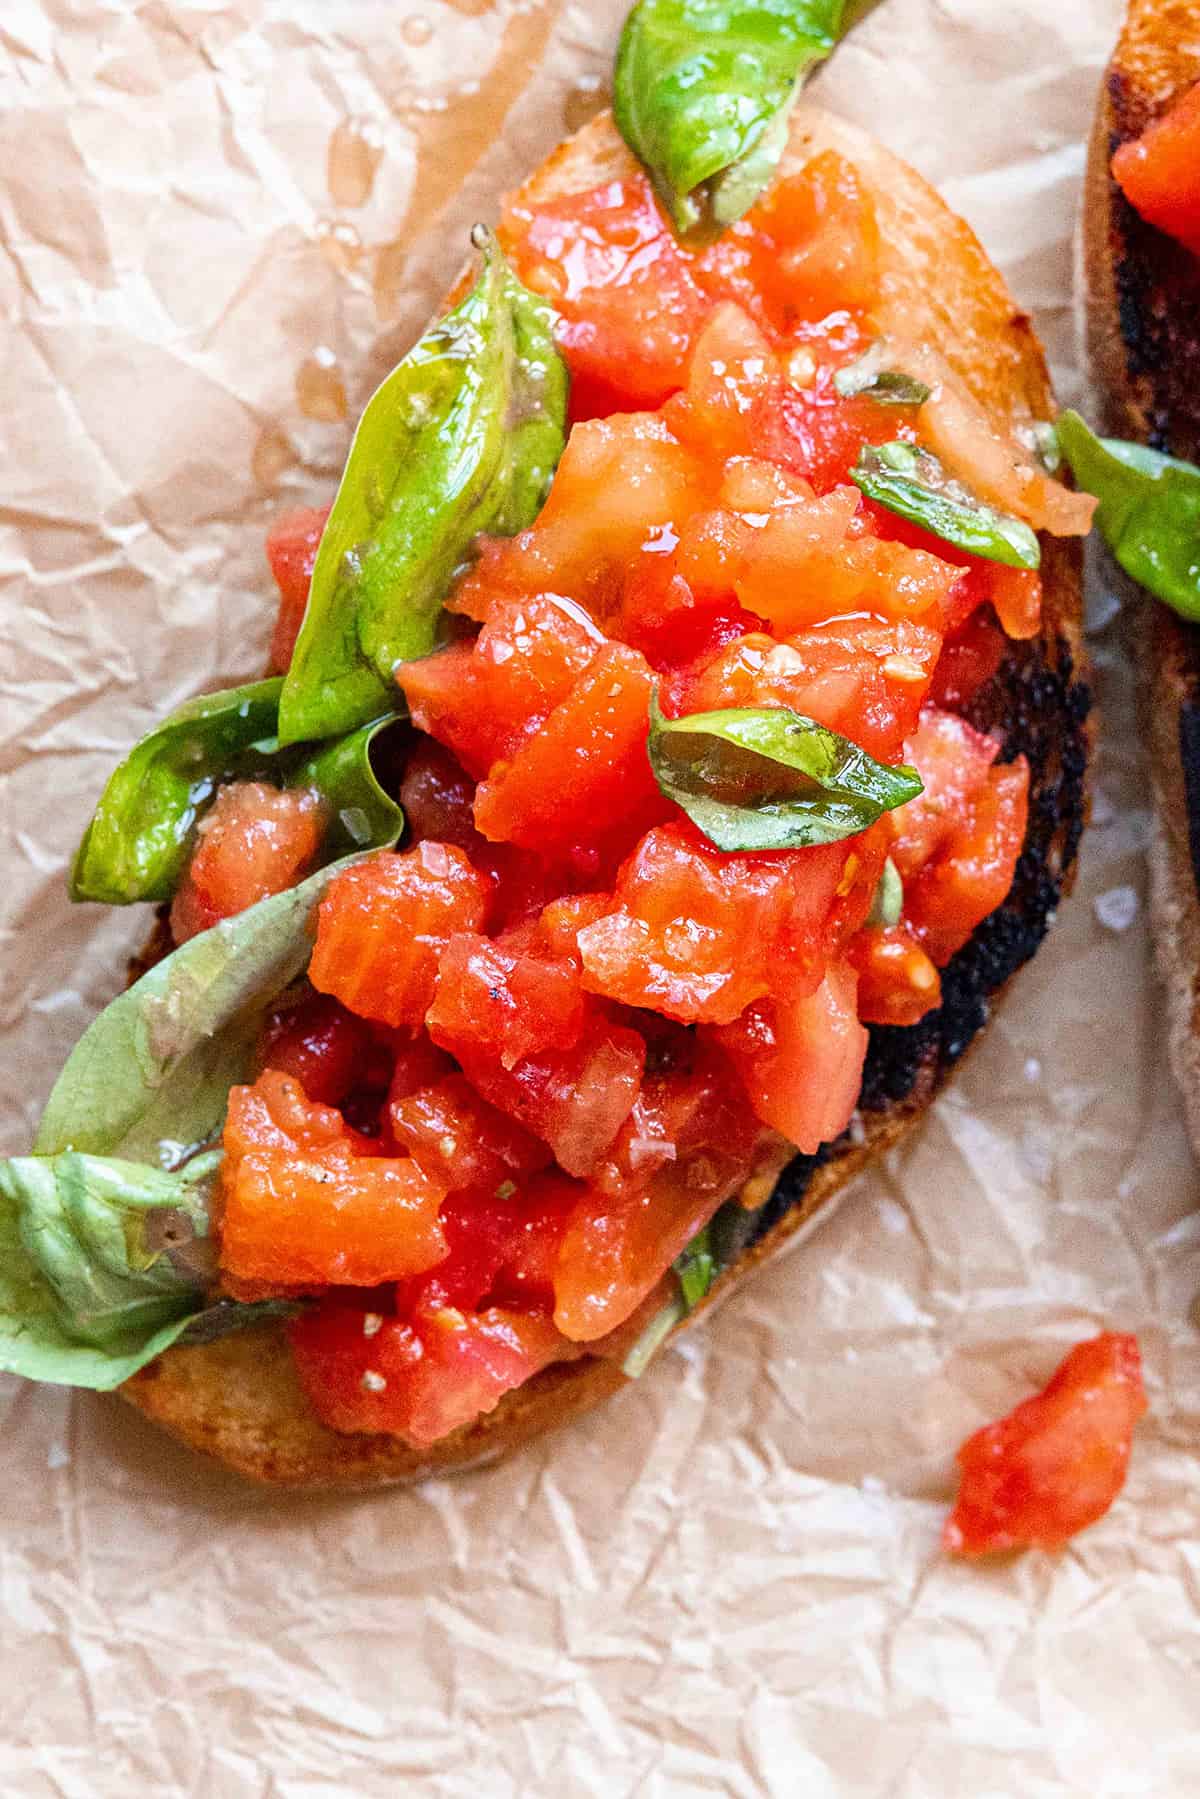 A slice of tomato and basil bruschetta with fresh tomatoes and basil, ready to enjoy.